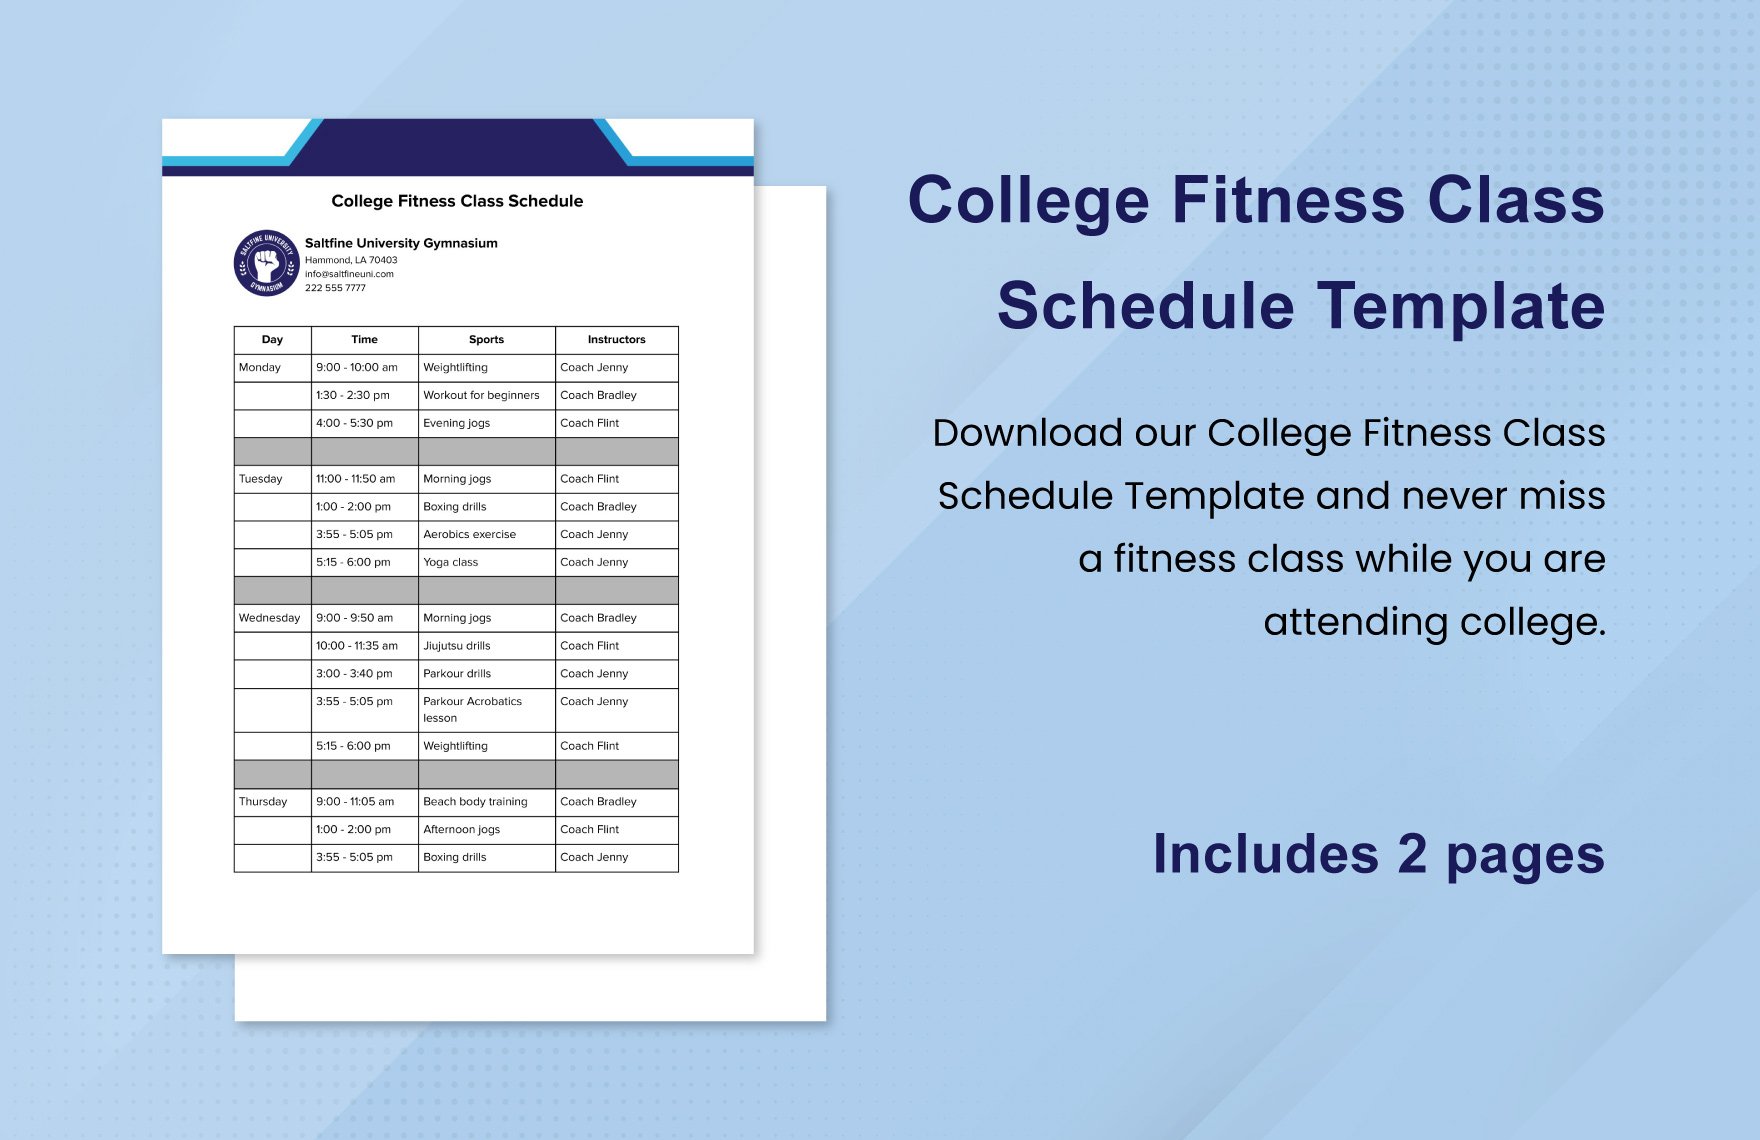 College Fitness Class Schedule Template